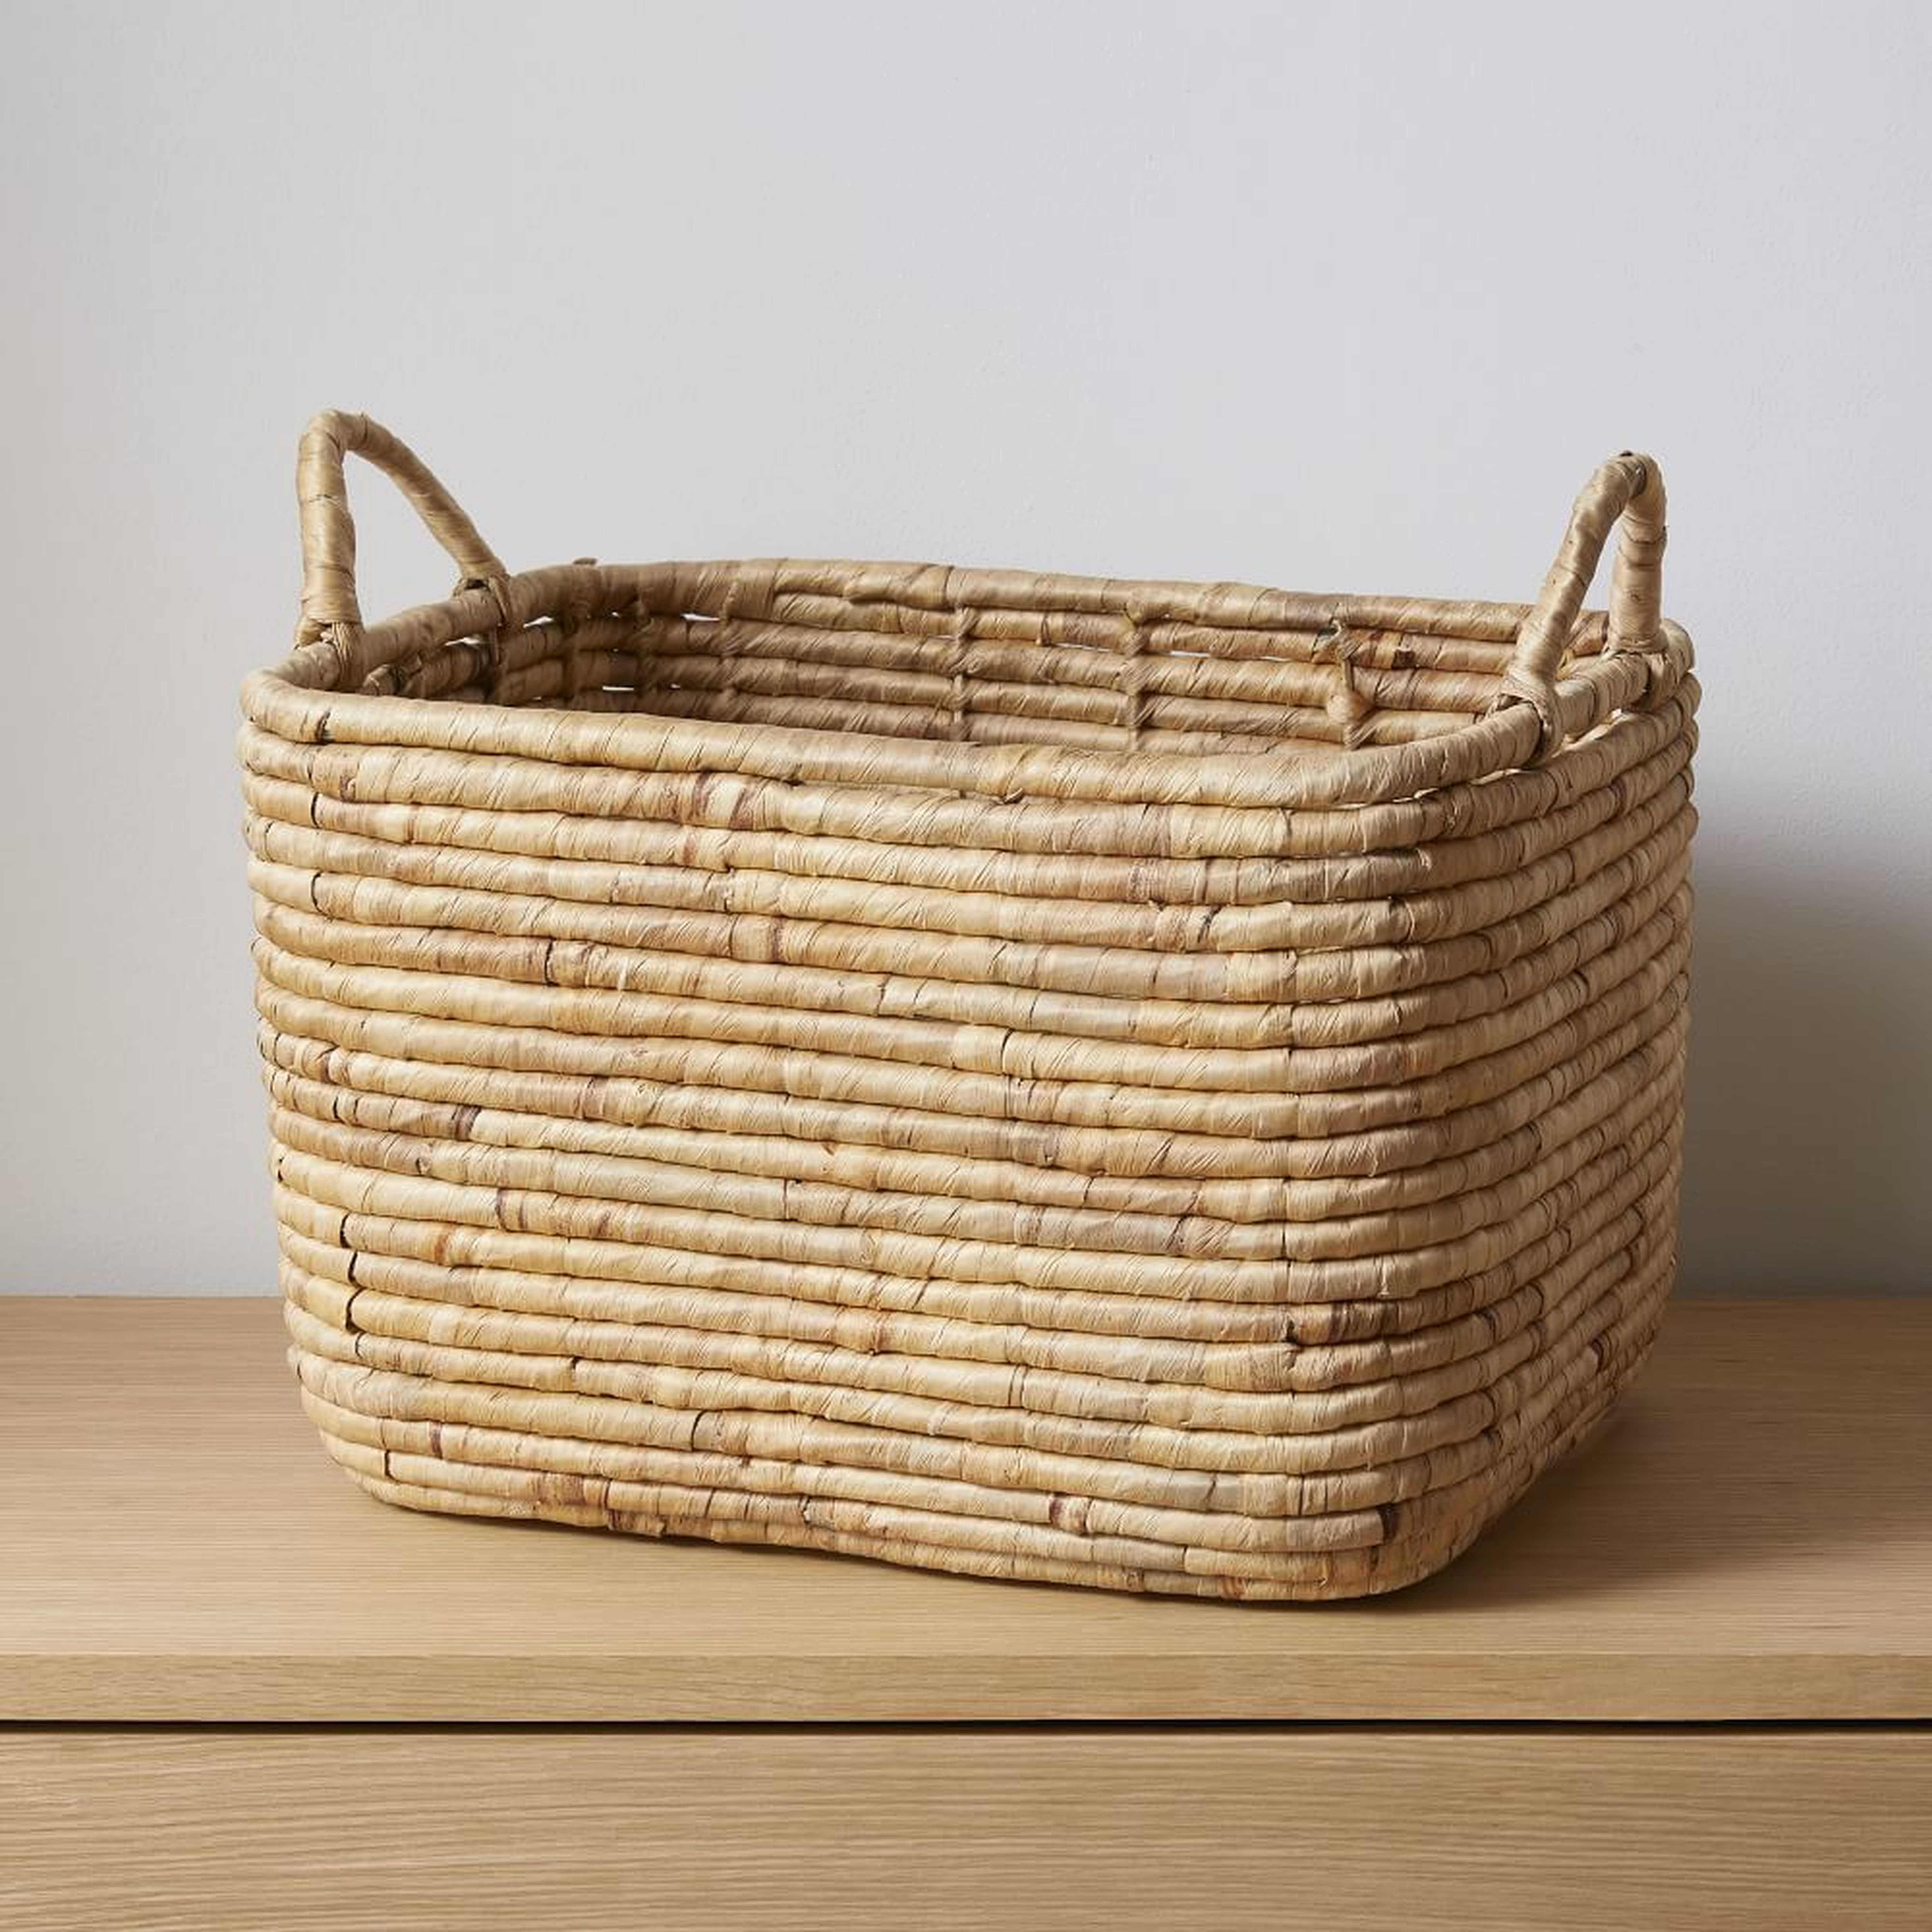 Woven Seagrass, Handle Baskets, Natural, Large, 19"W x 15"D x 15"H - West Elm